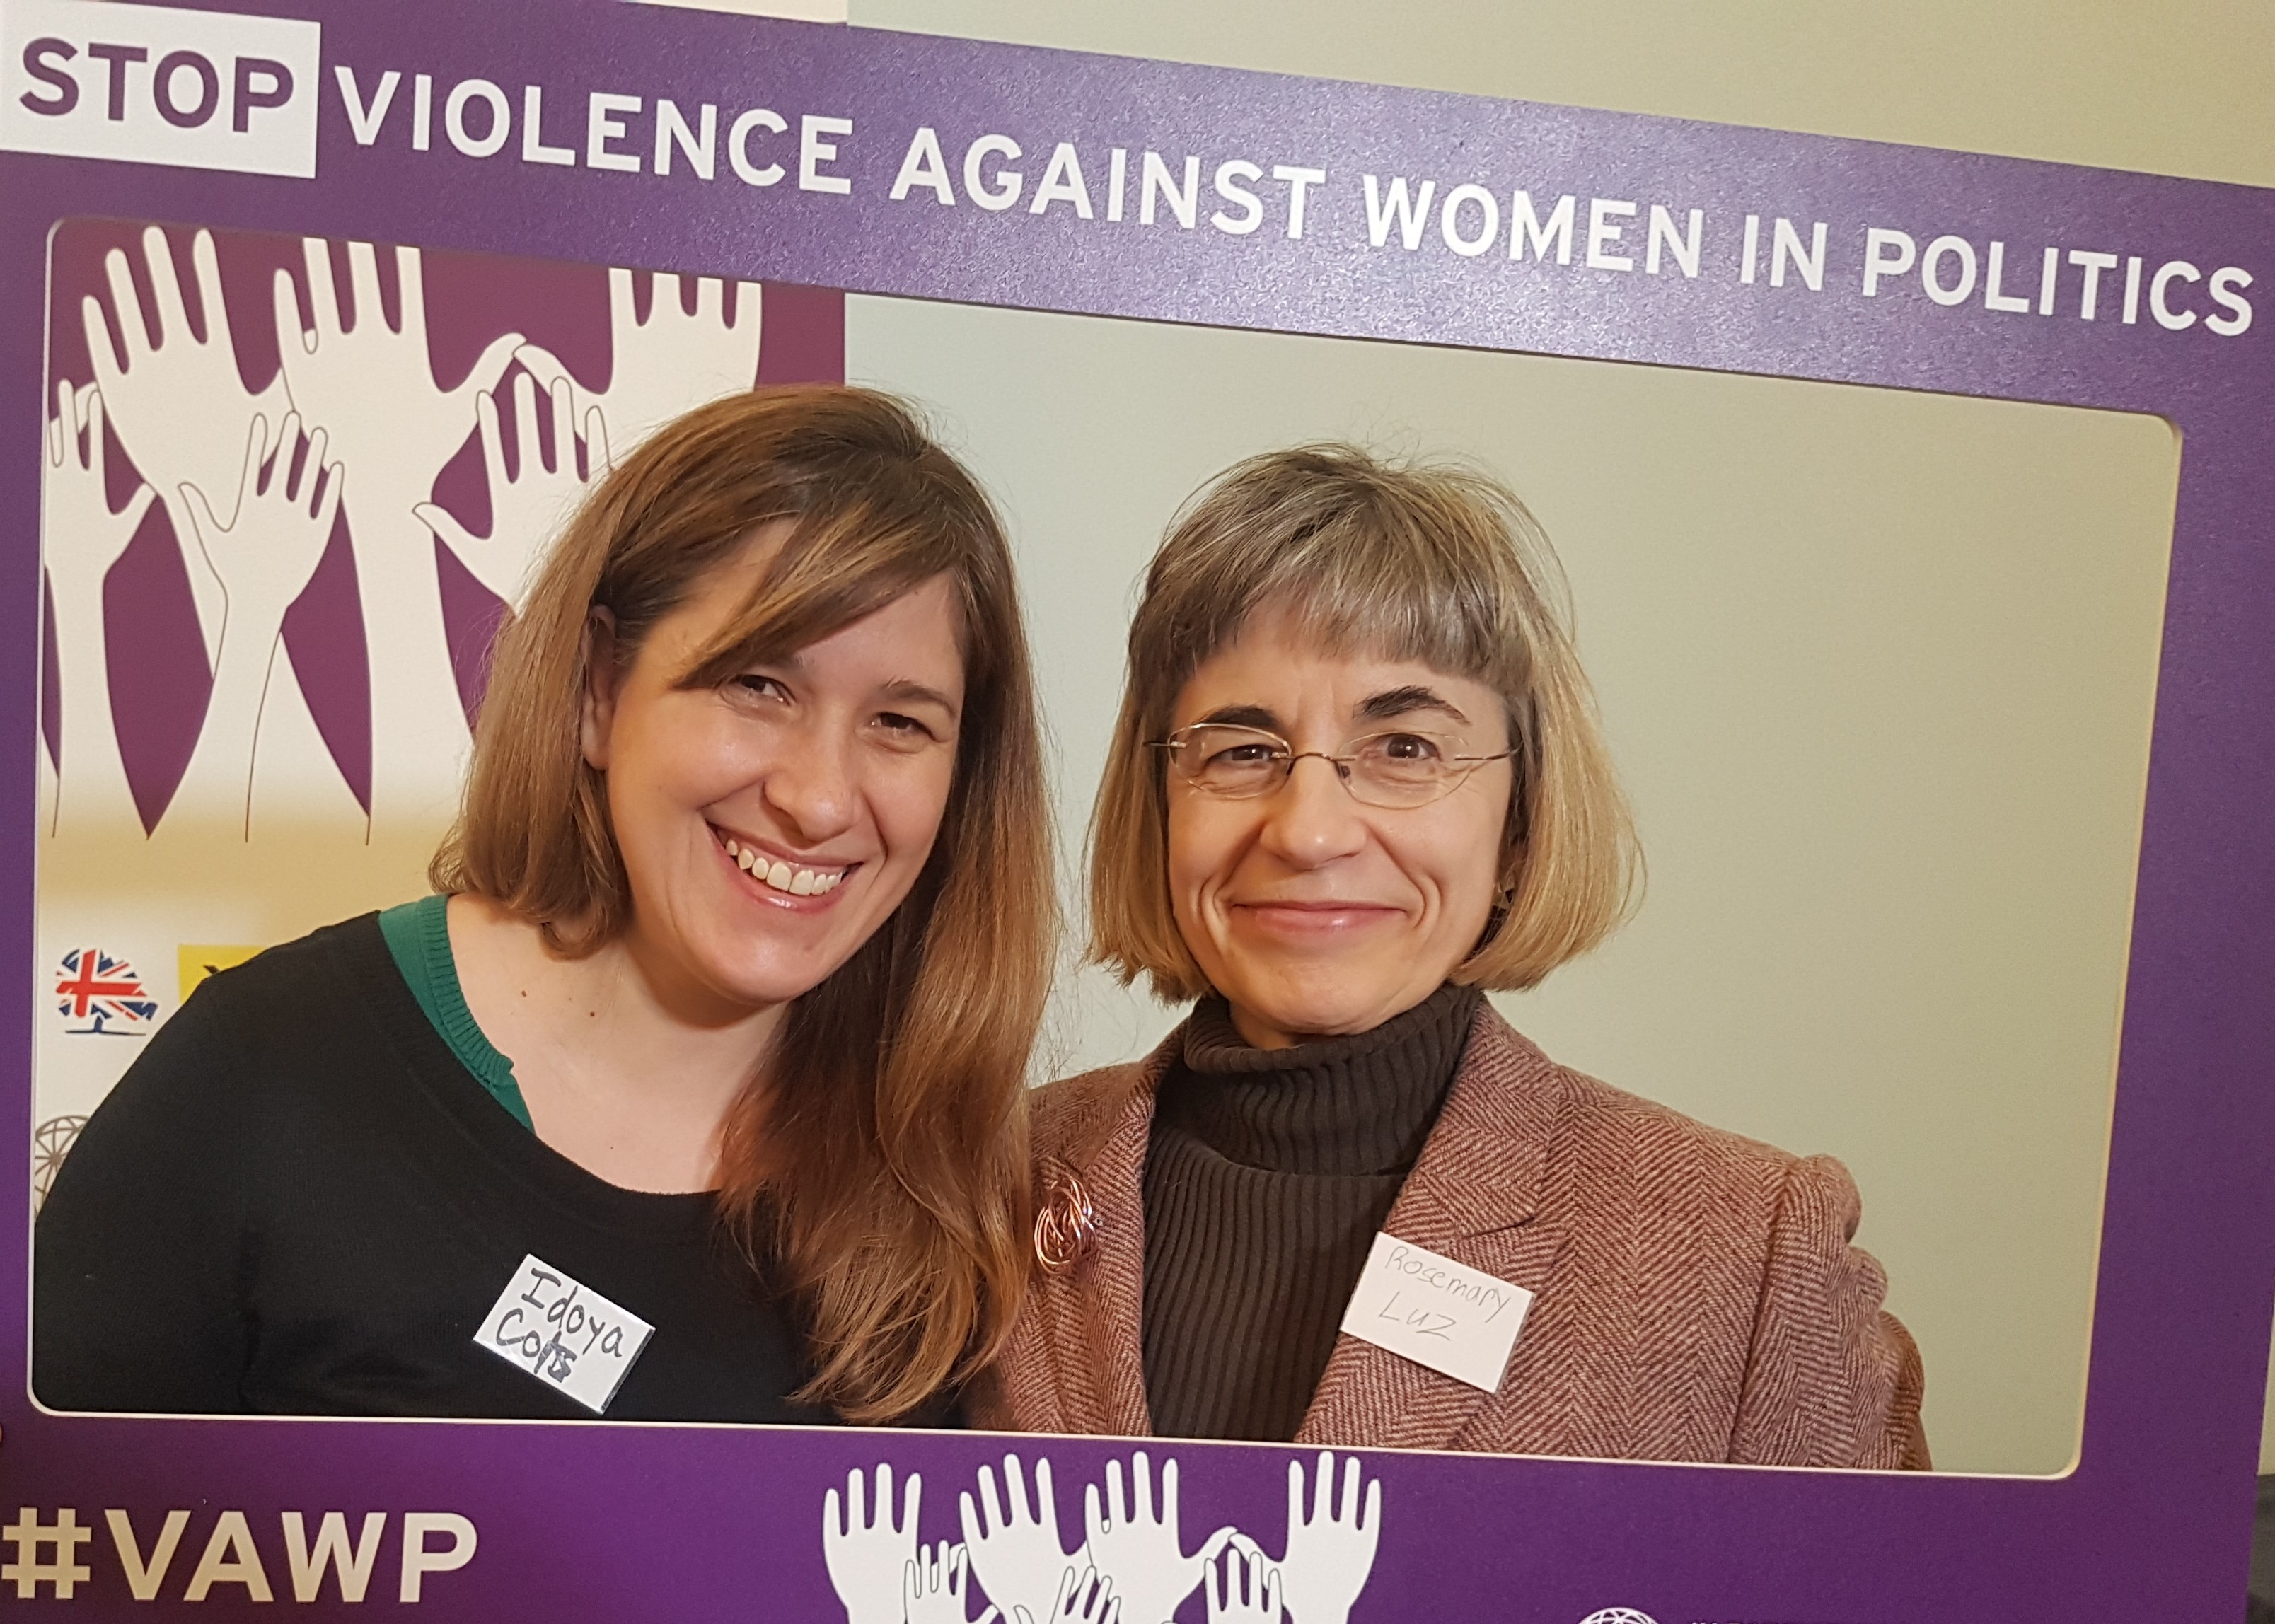 Violence Against Women In Politics Conference In 2018